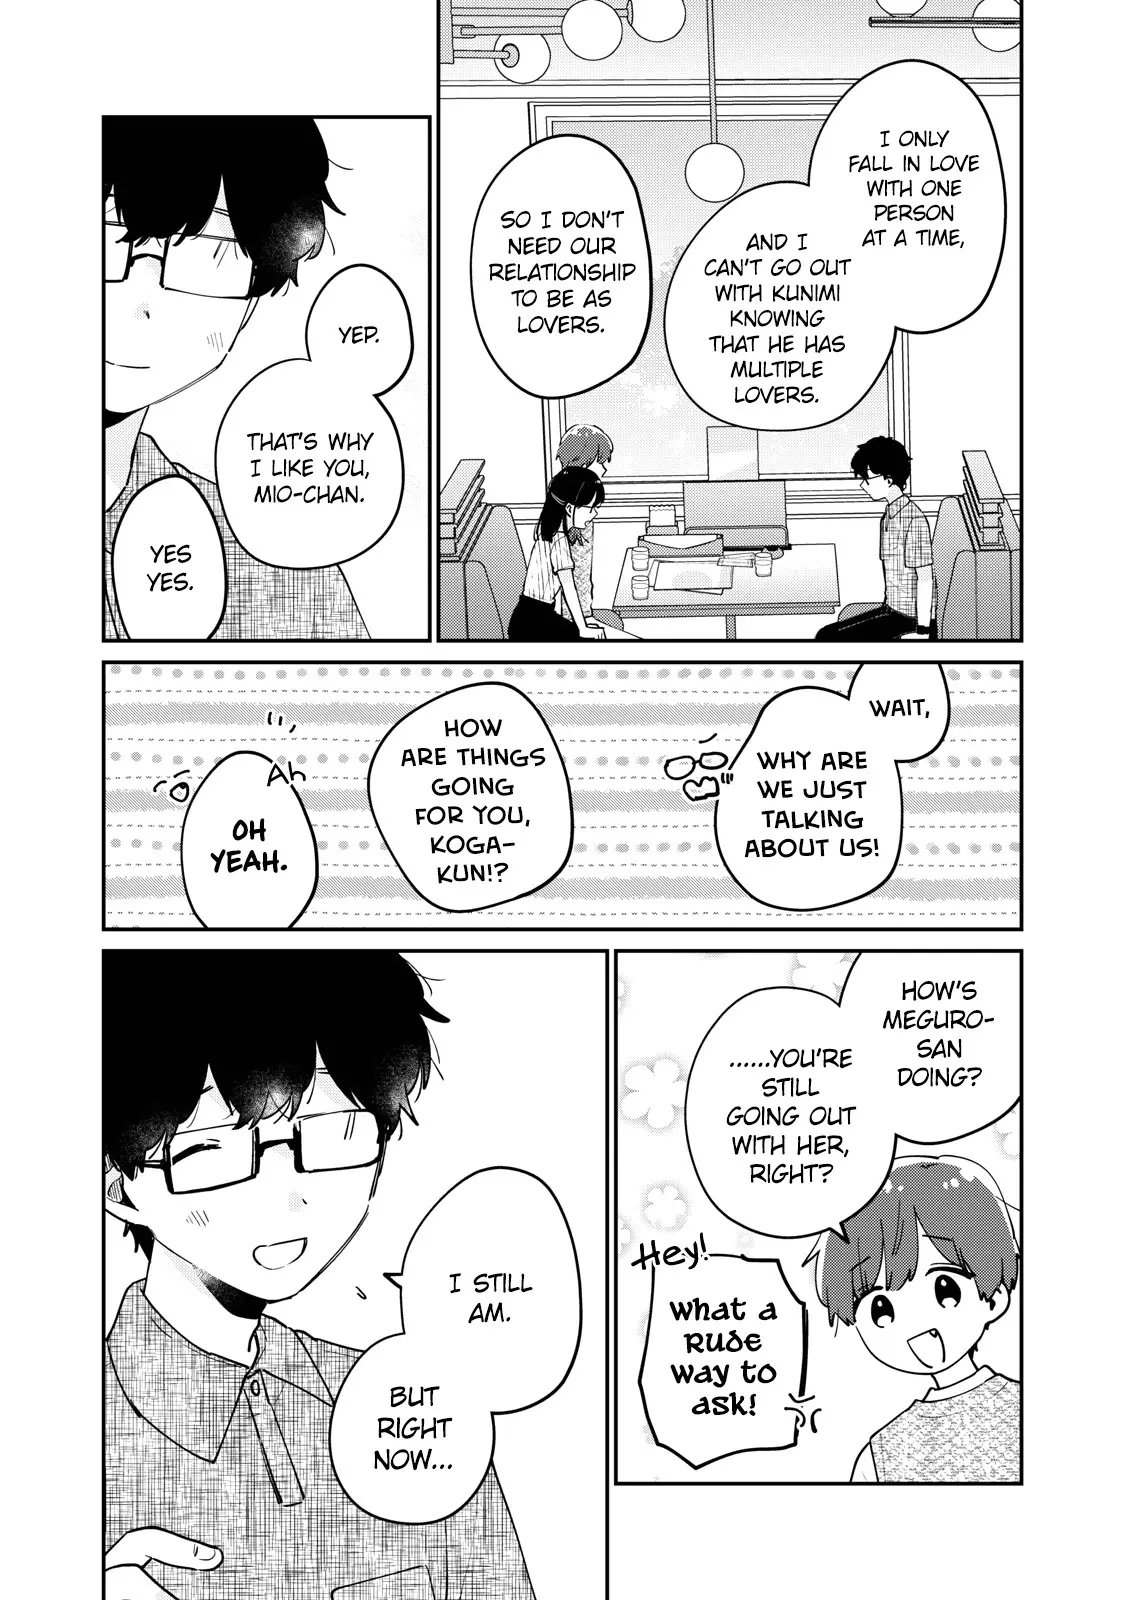 It's Not Meguro-San's First Time - 73 page 8-e9c69d7c